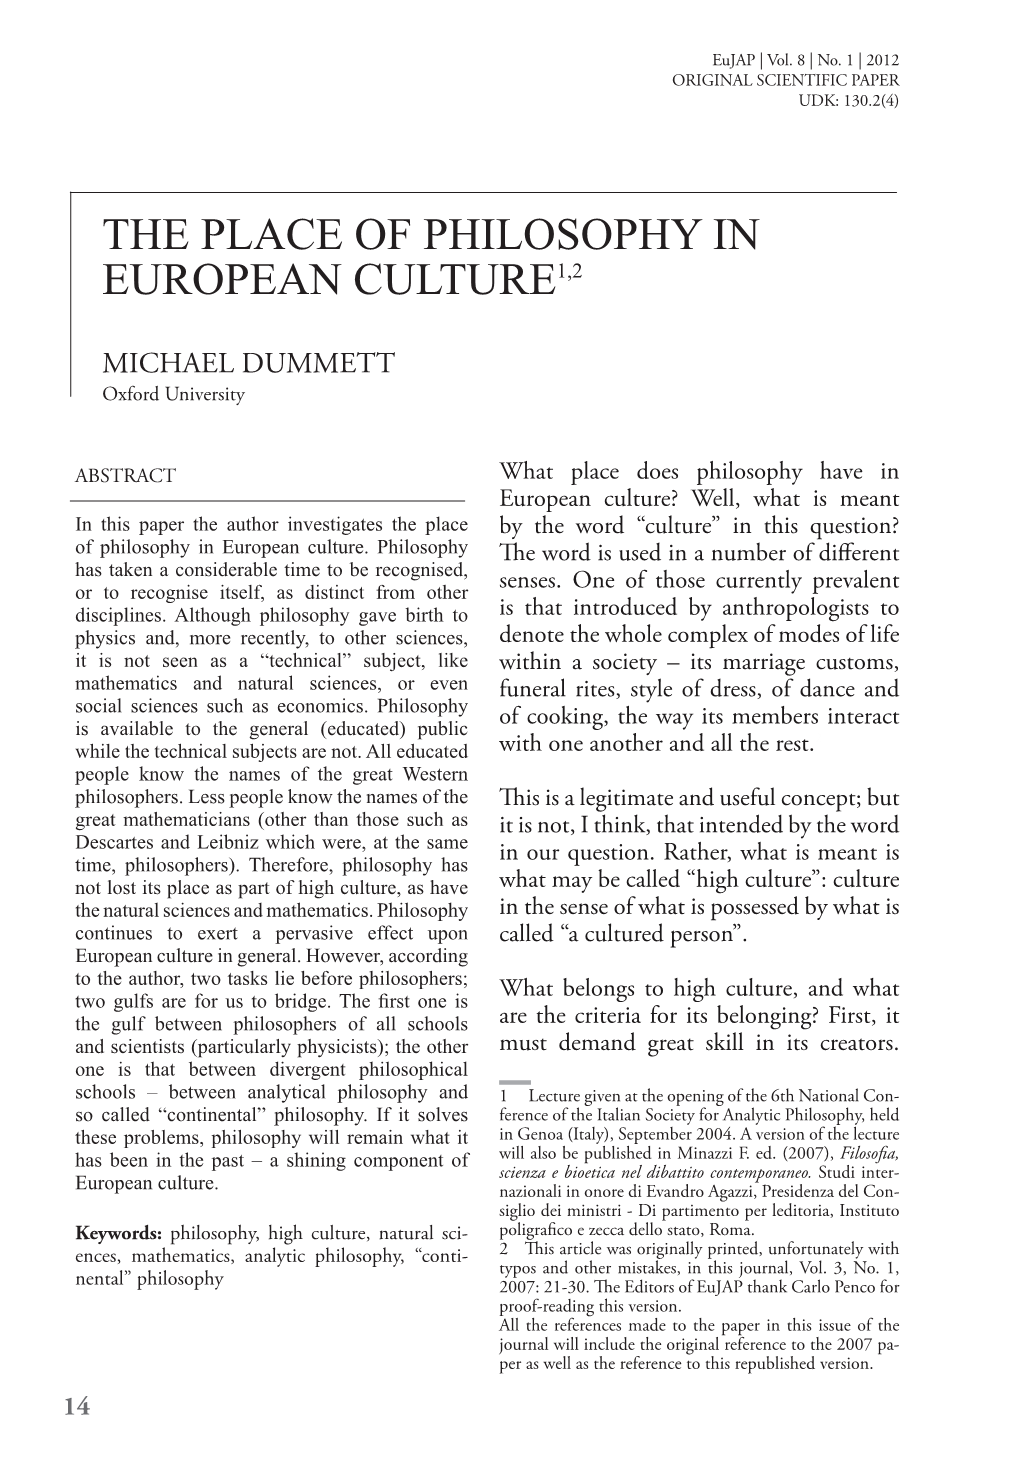 The Place of Philosophy in European Culture1,2